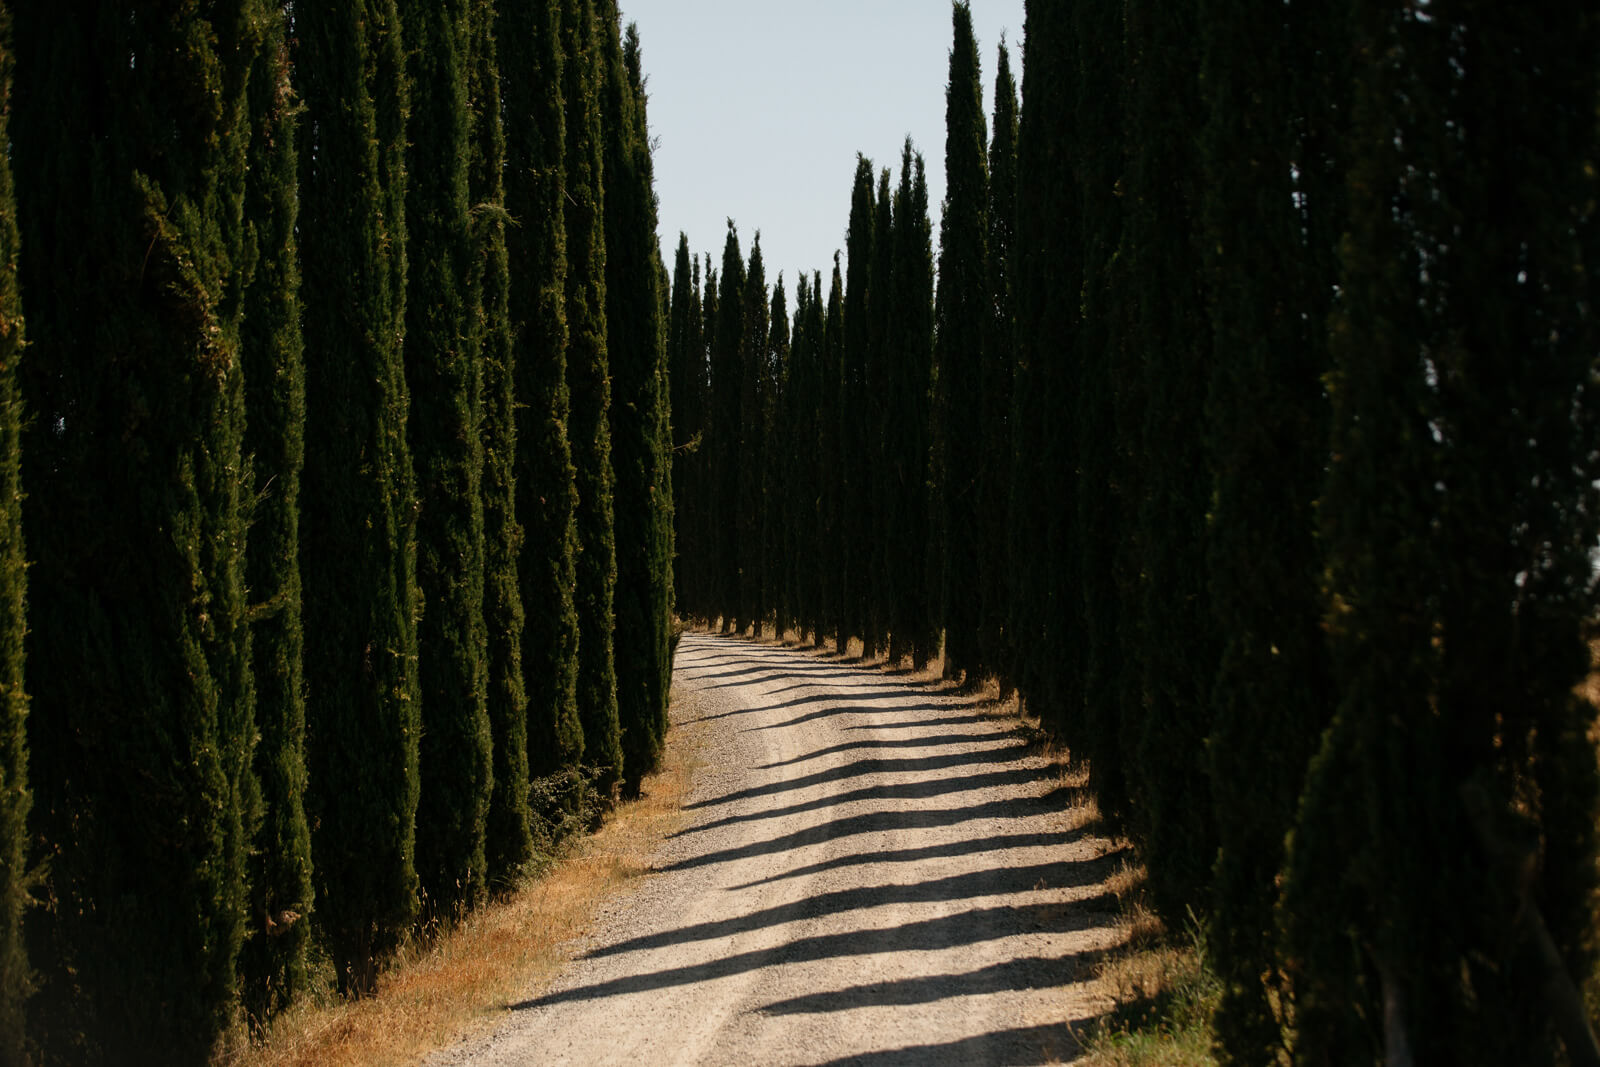 bendy road lined with cypress trees